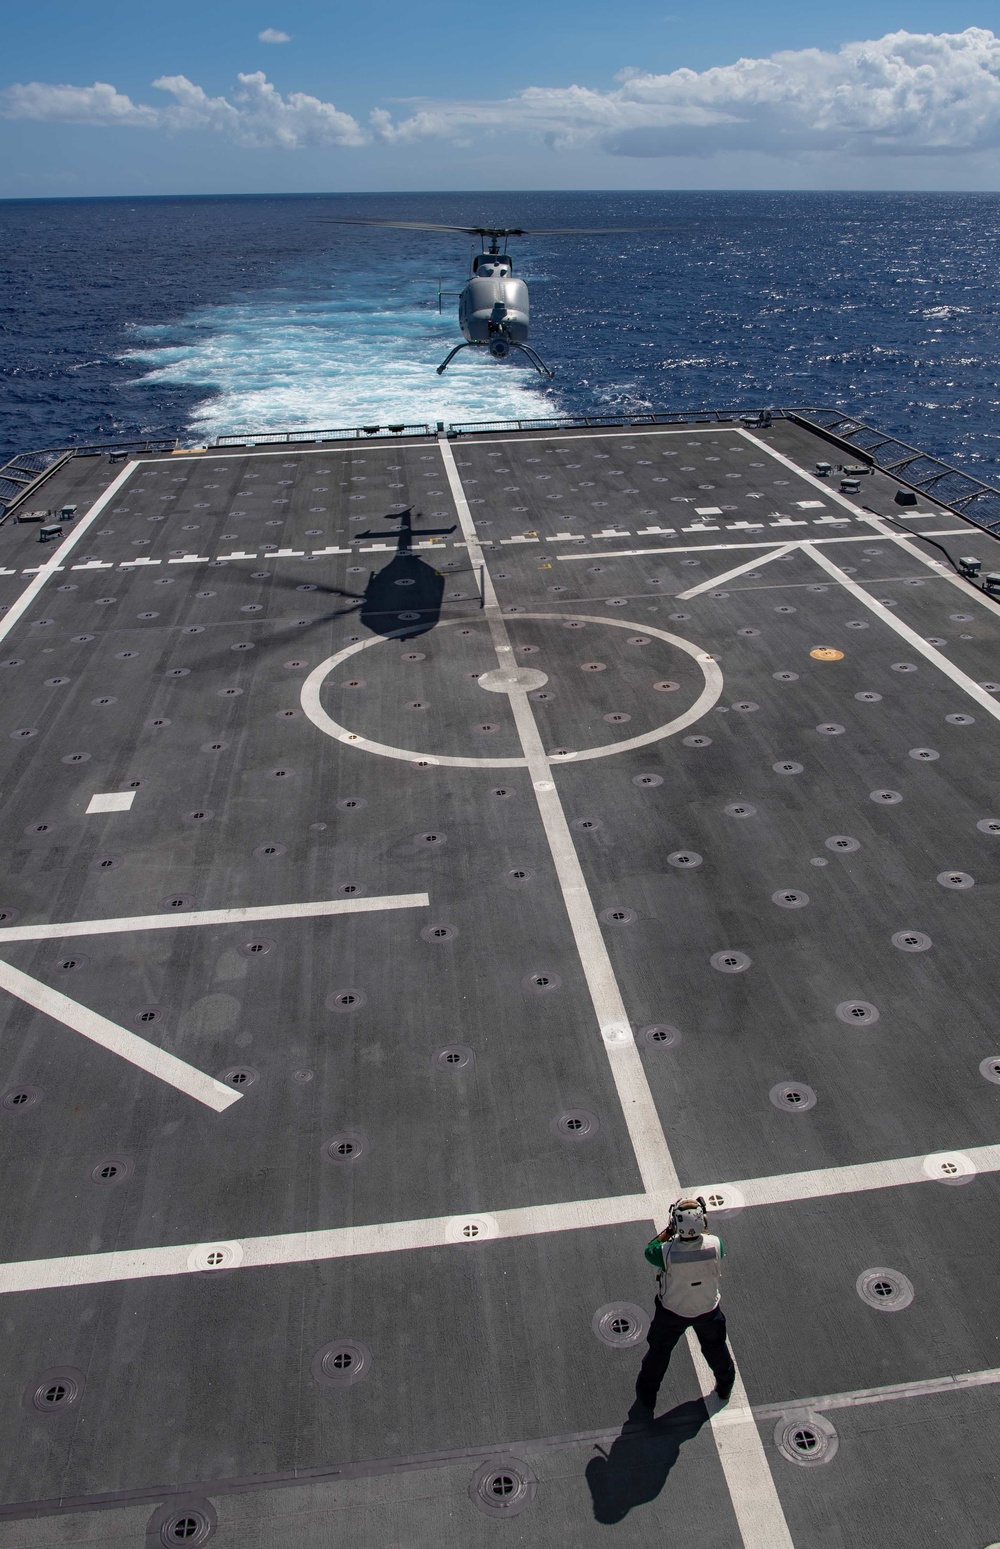 HSC 23 and USS Jackson (LCS 6) Conduct MQ-8C Fire Scout Return to Flight